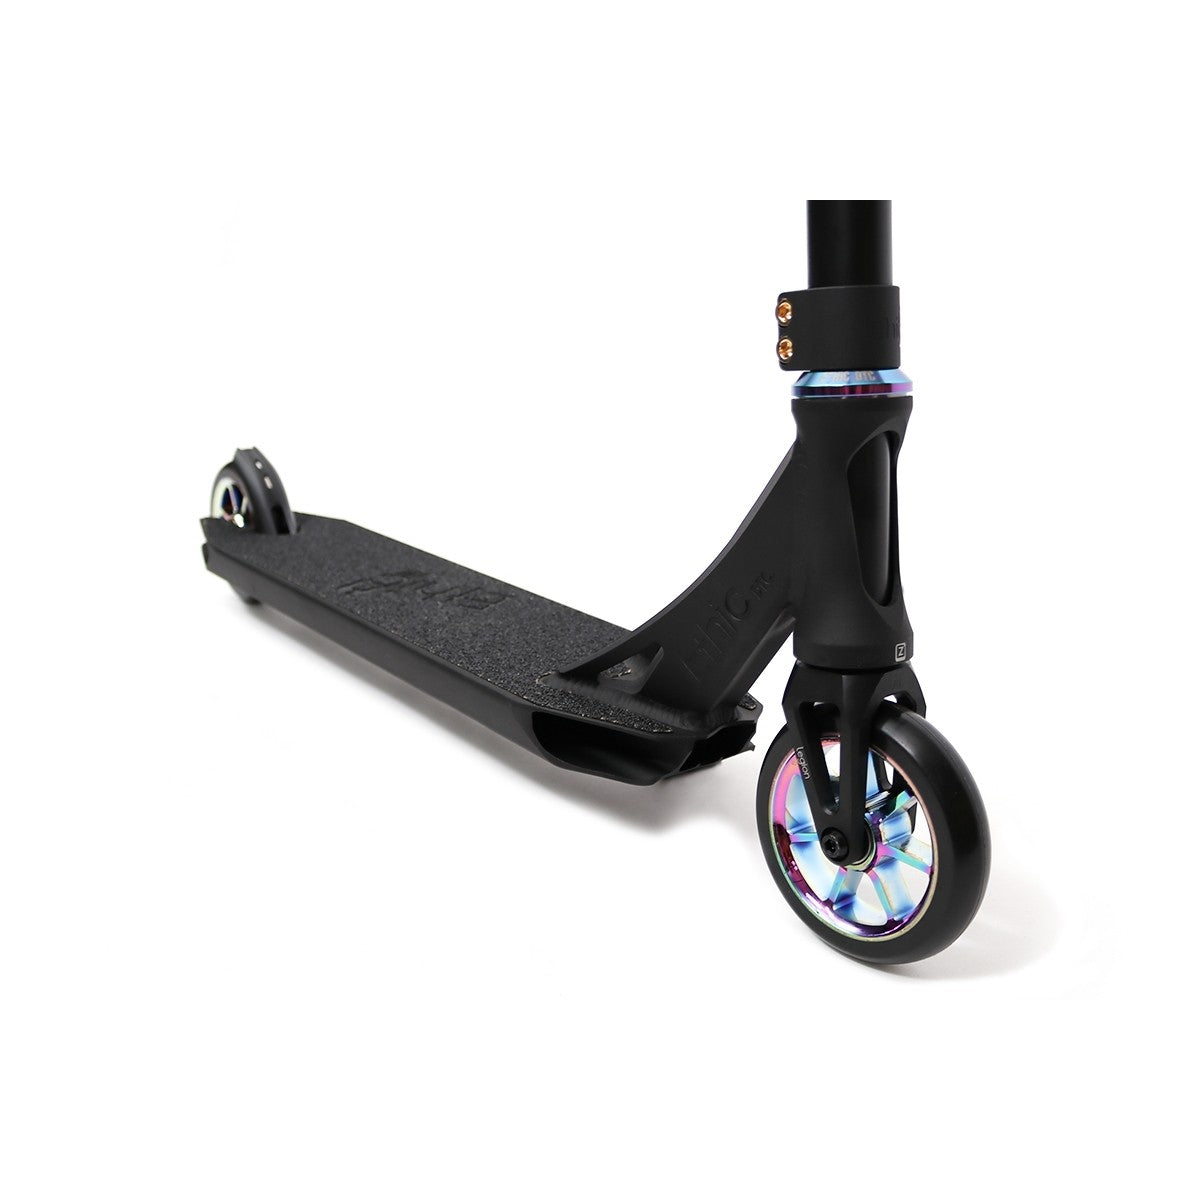 Ethic Dtc Artefact V2 Scooter - Neo Chrome